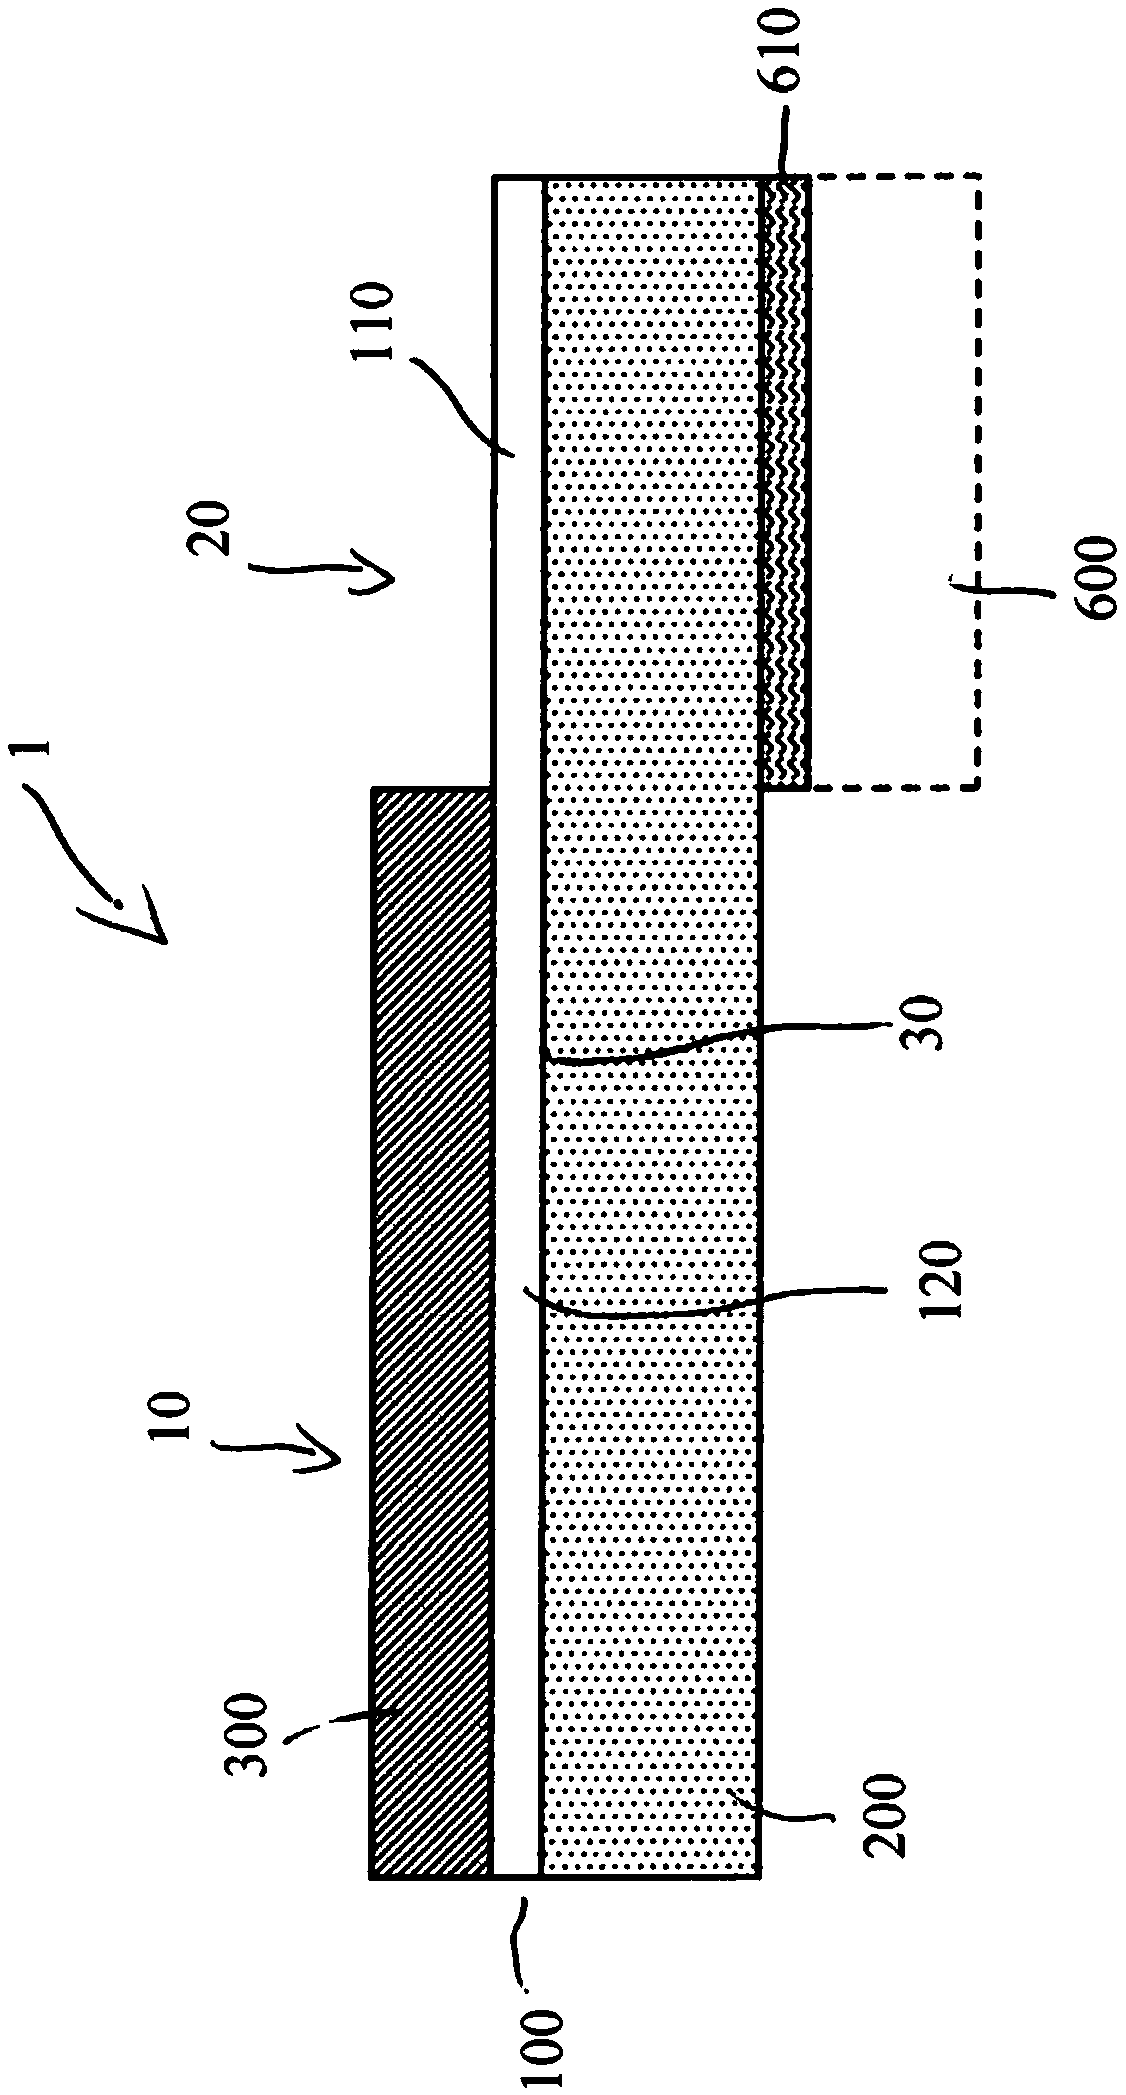 Film structure with electrical functionality and external contacting